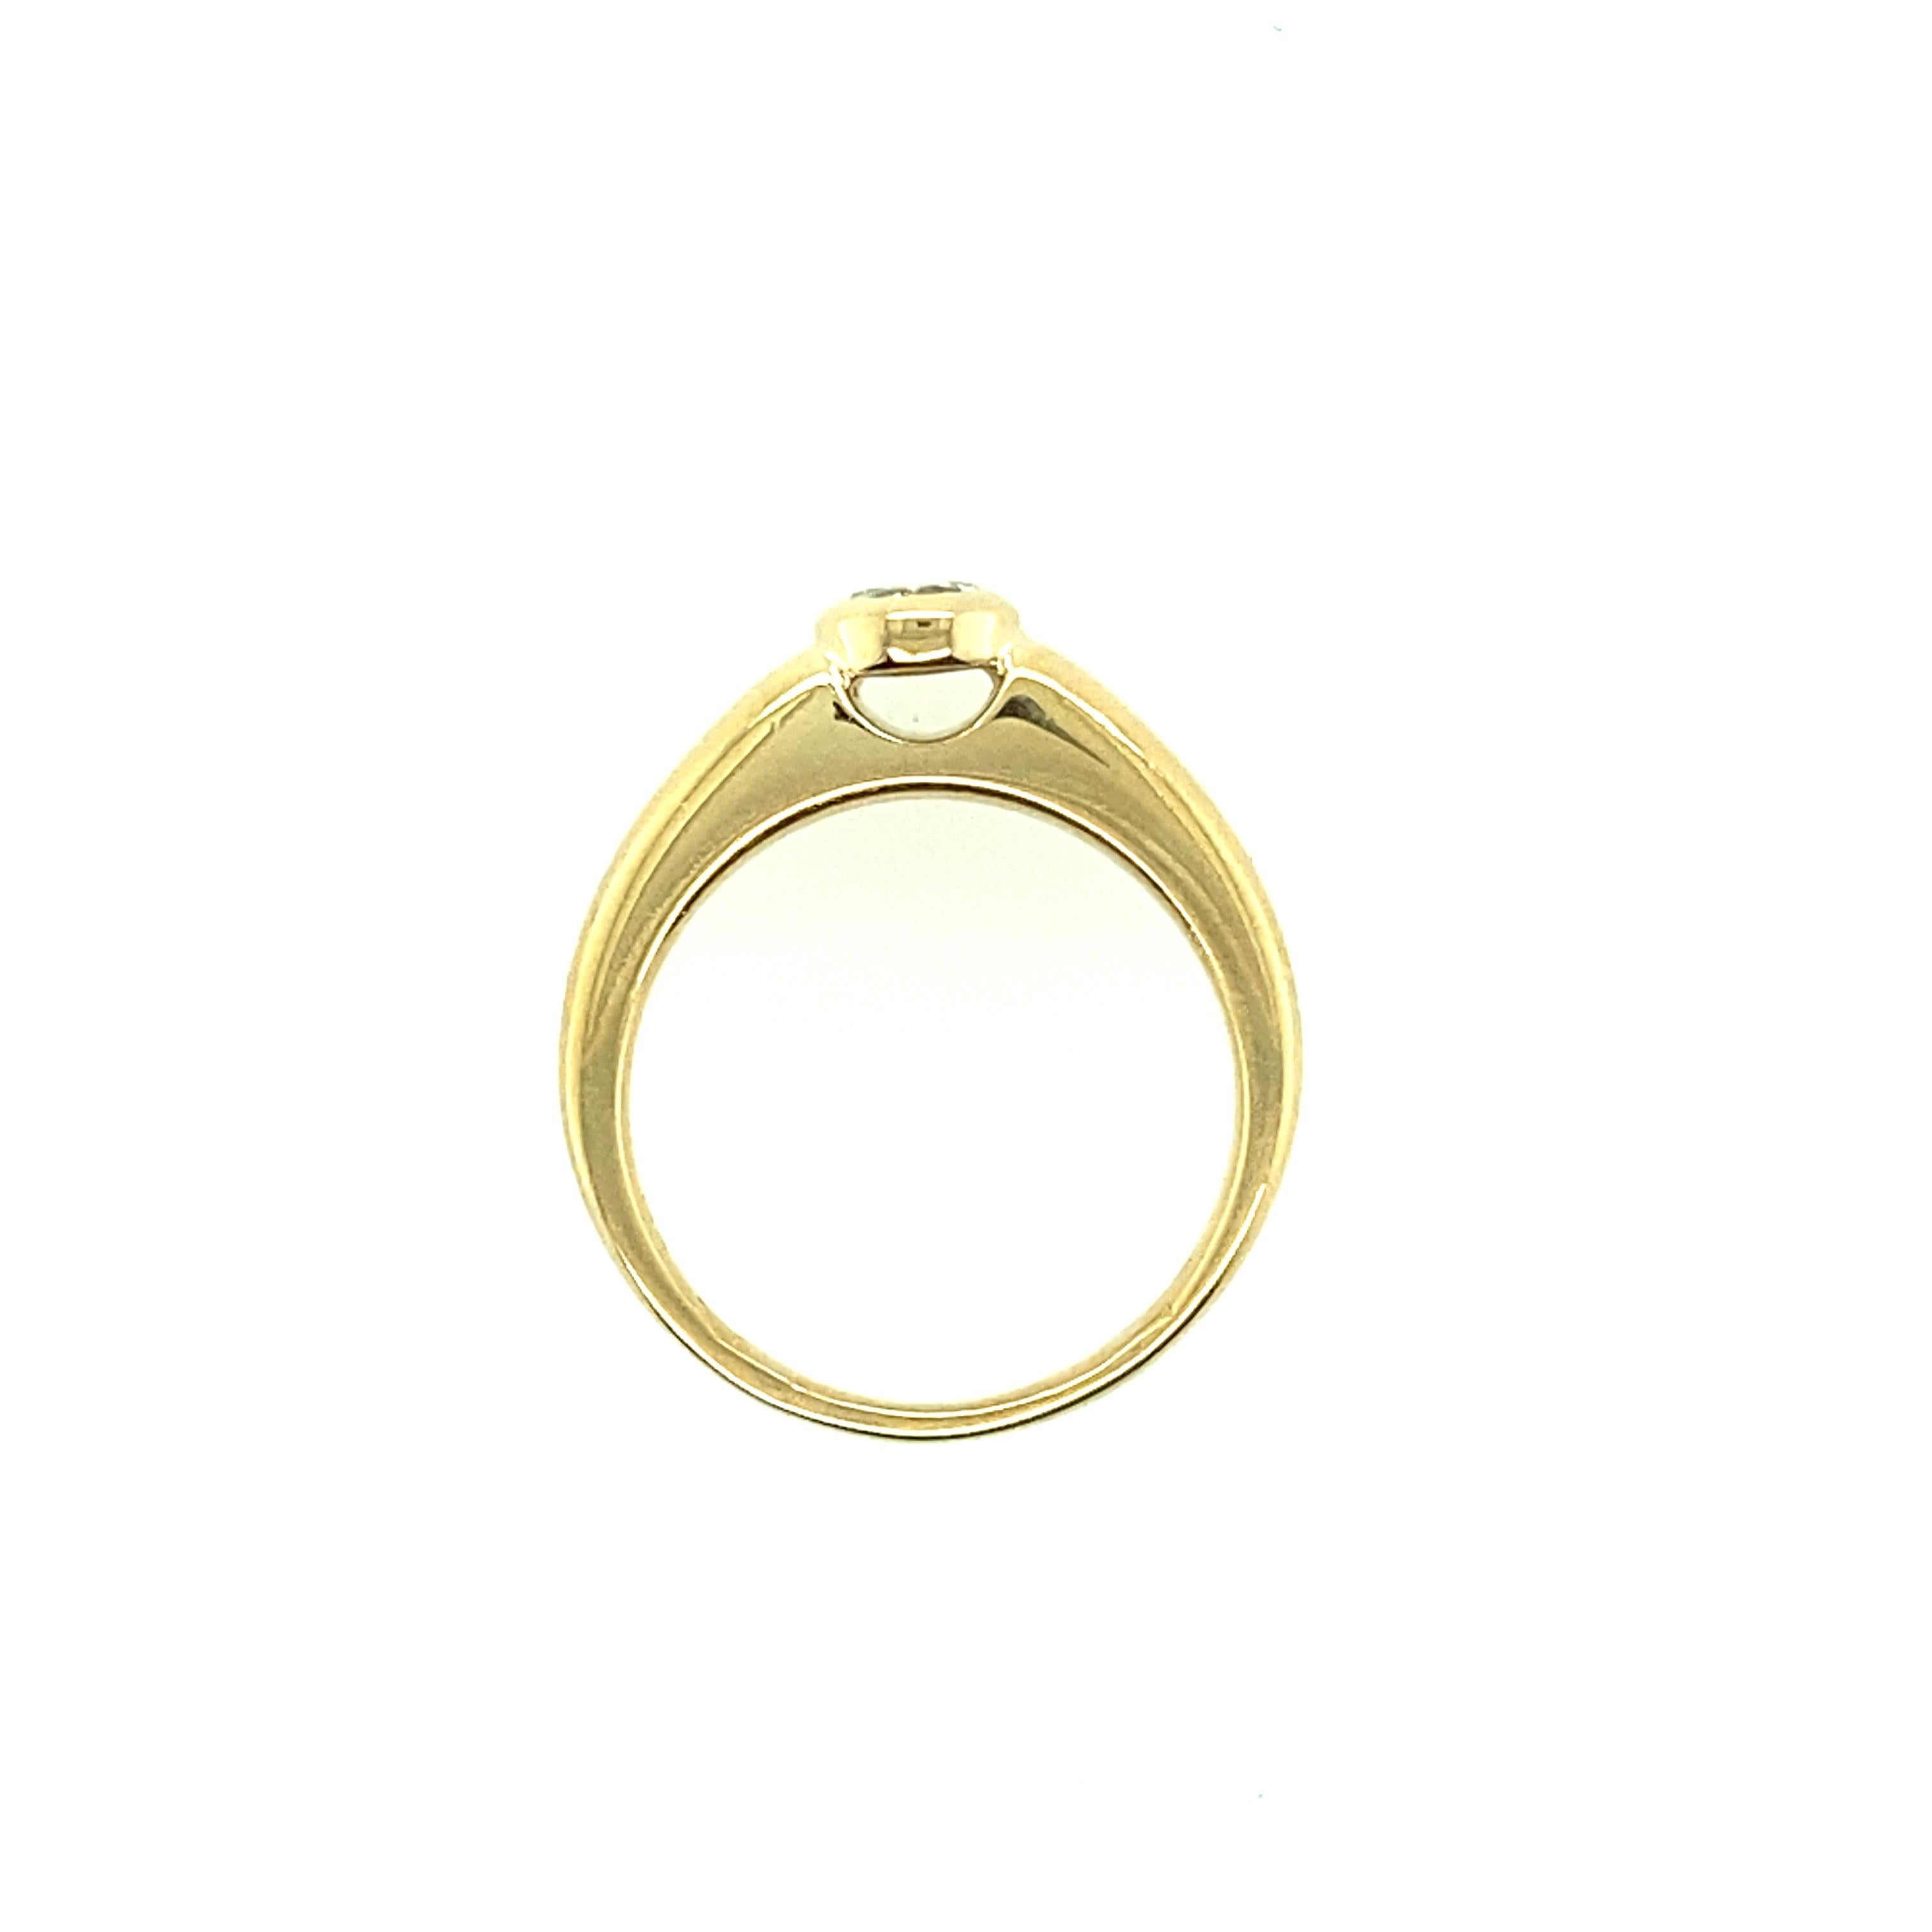 One 18 karat yellow gold diamond engagement ring bezel set with one brilliant-cut diamond, approximately  0.25 carat total with I/J color and SI clarity. 